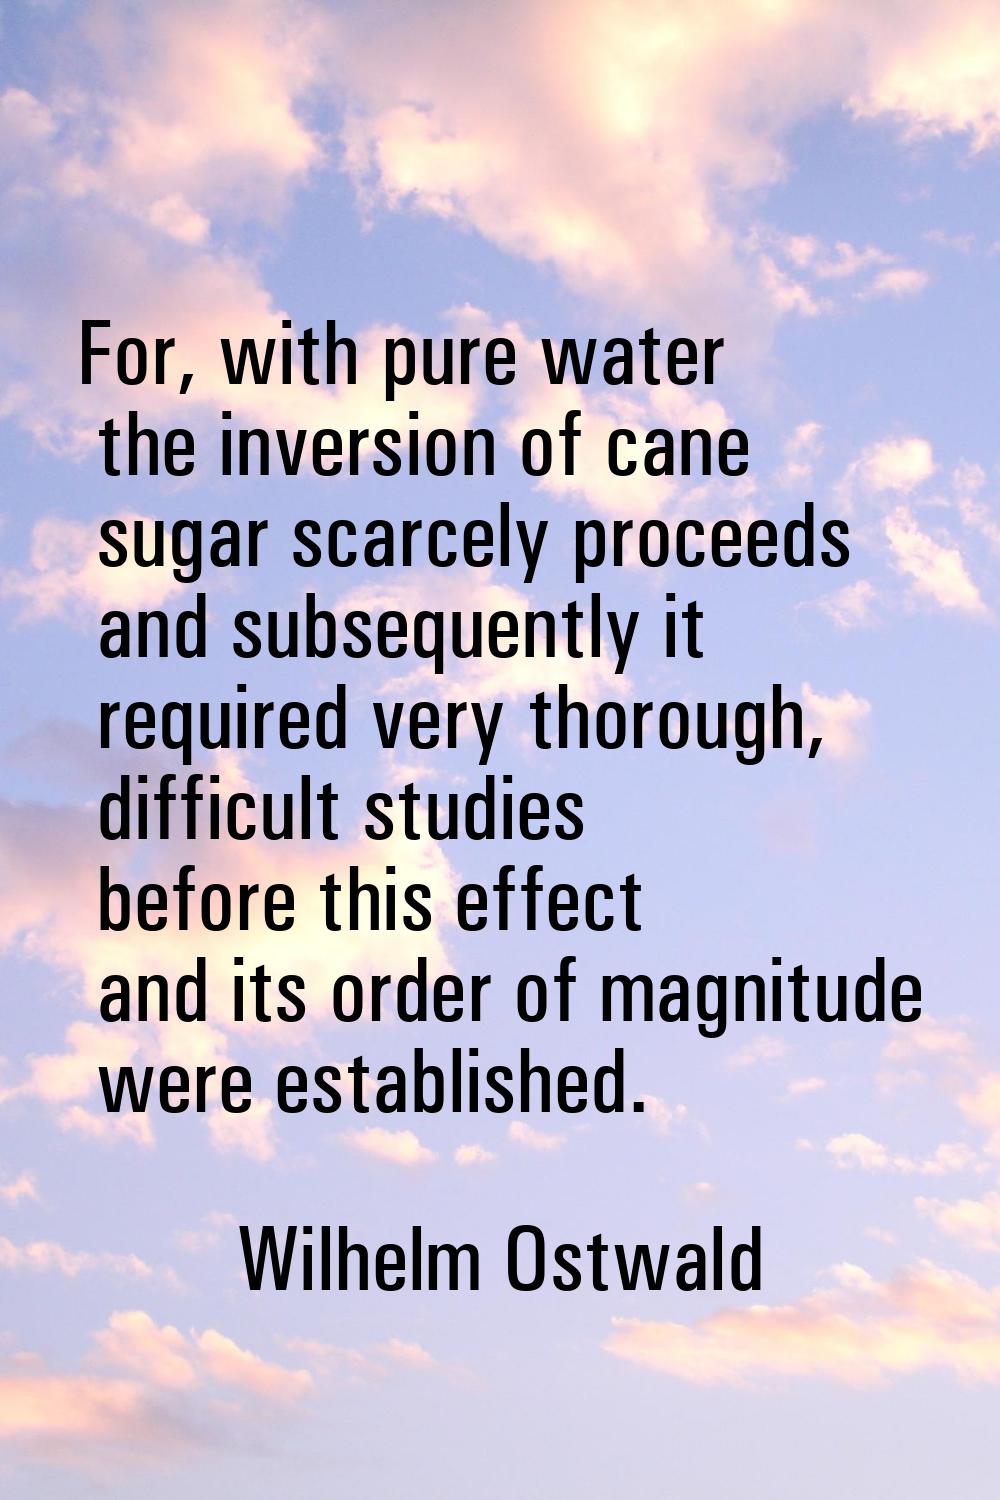 For, with pure water the inversion of cane sugar scarcely proceeds and subsequently it required ver